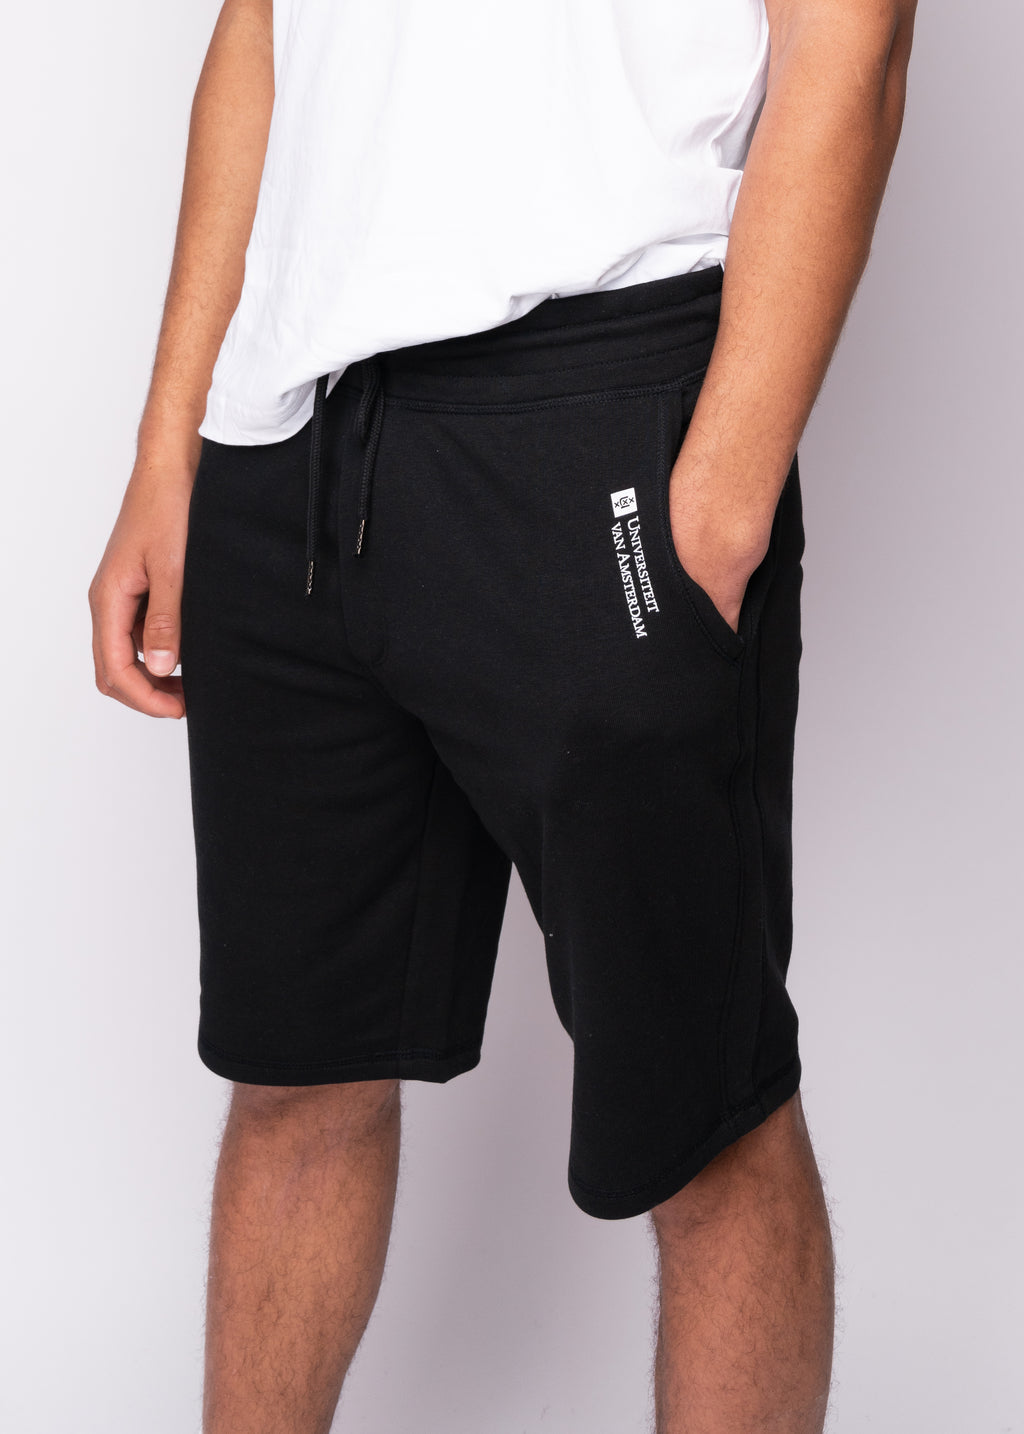 Shorts unisex with the University of Amsterdam logo up to the knee in multiple colors